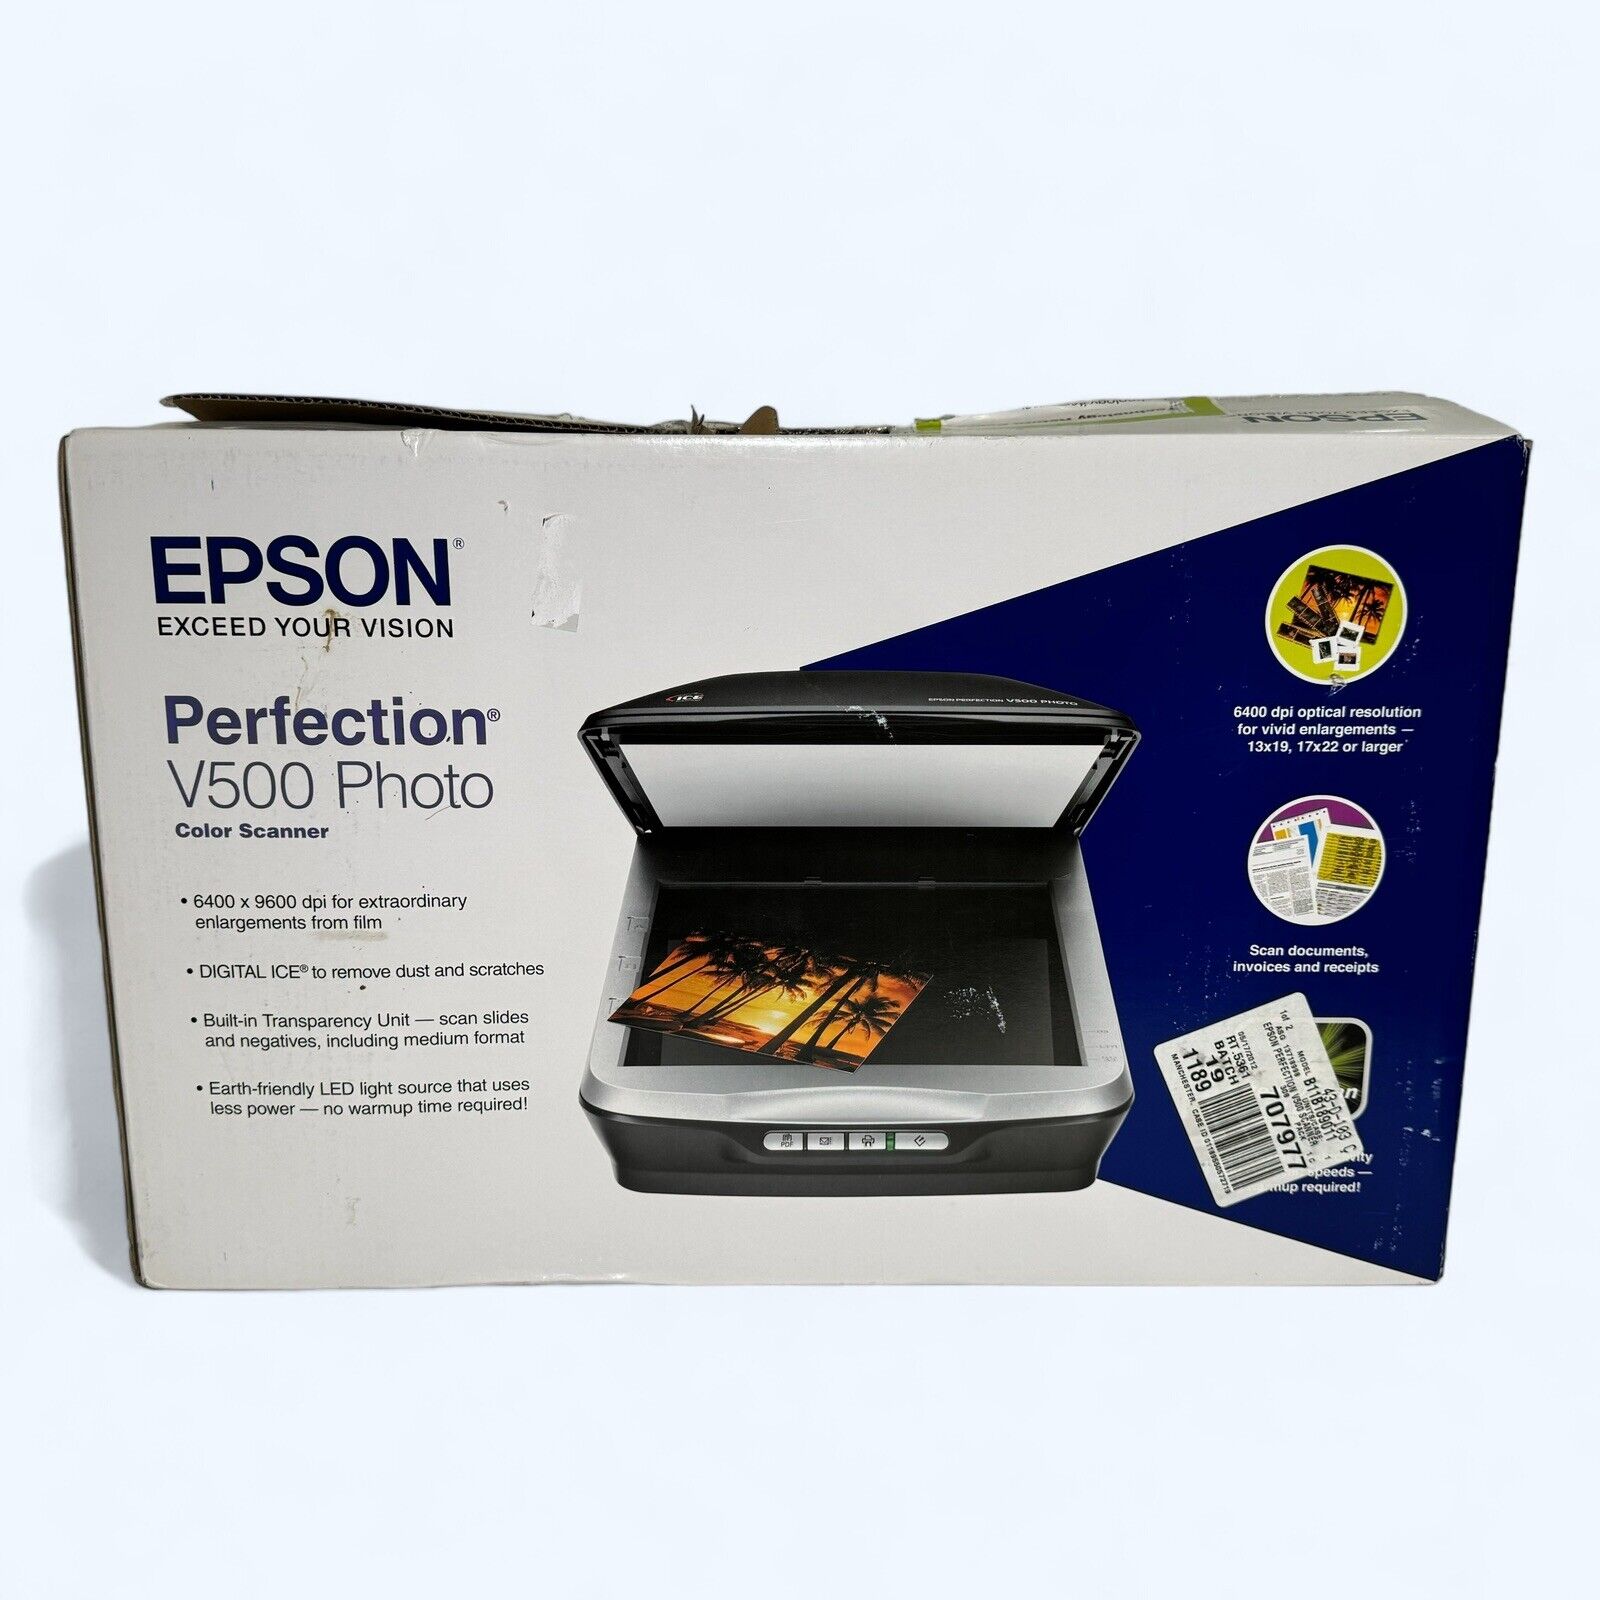 BRAND NEW Epson Perfection V500 Photo Color Flatbed Scanner OPEN BOX